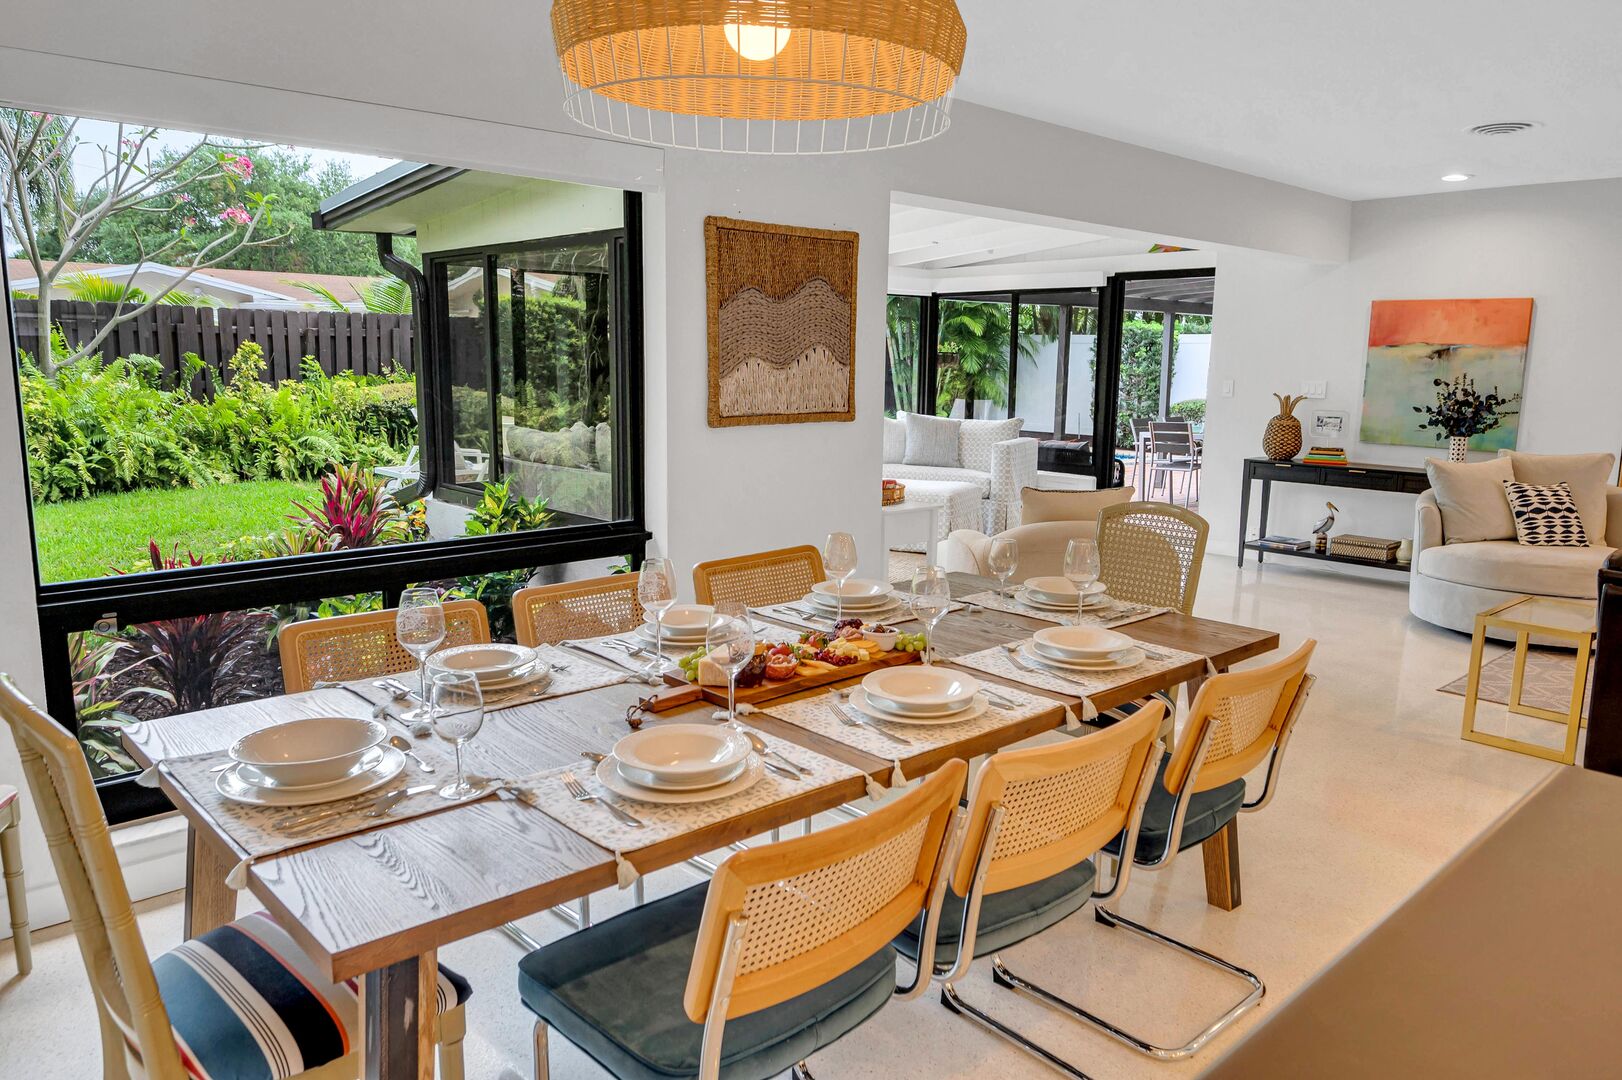 The dining area adjacent to the kitchen is fit for eight and overlooks the lush garden.